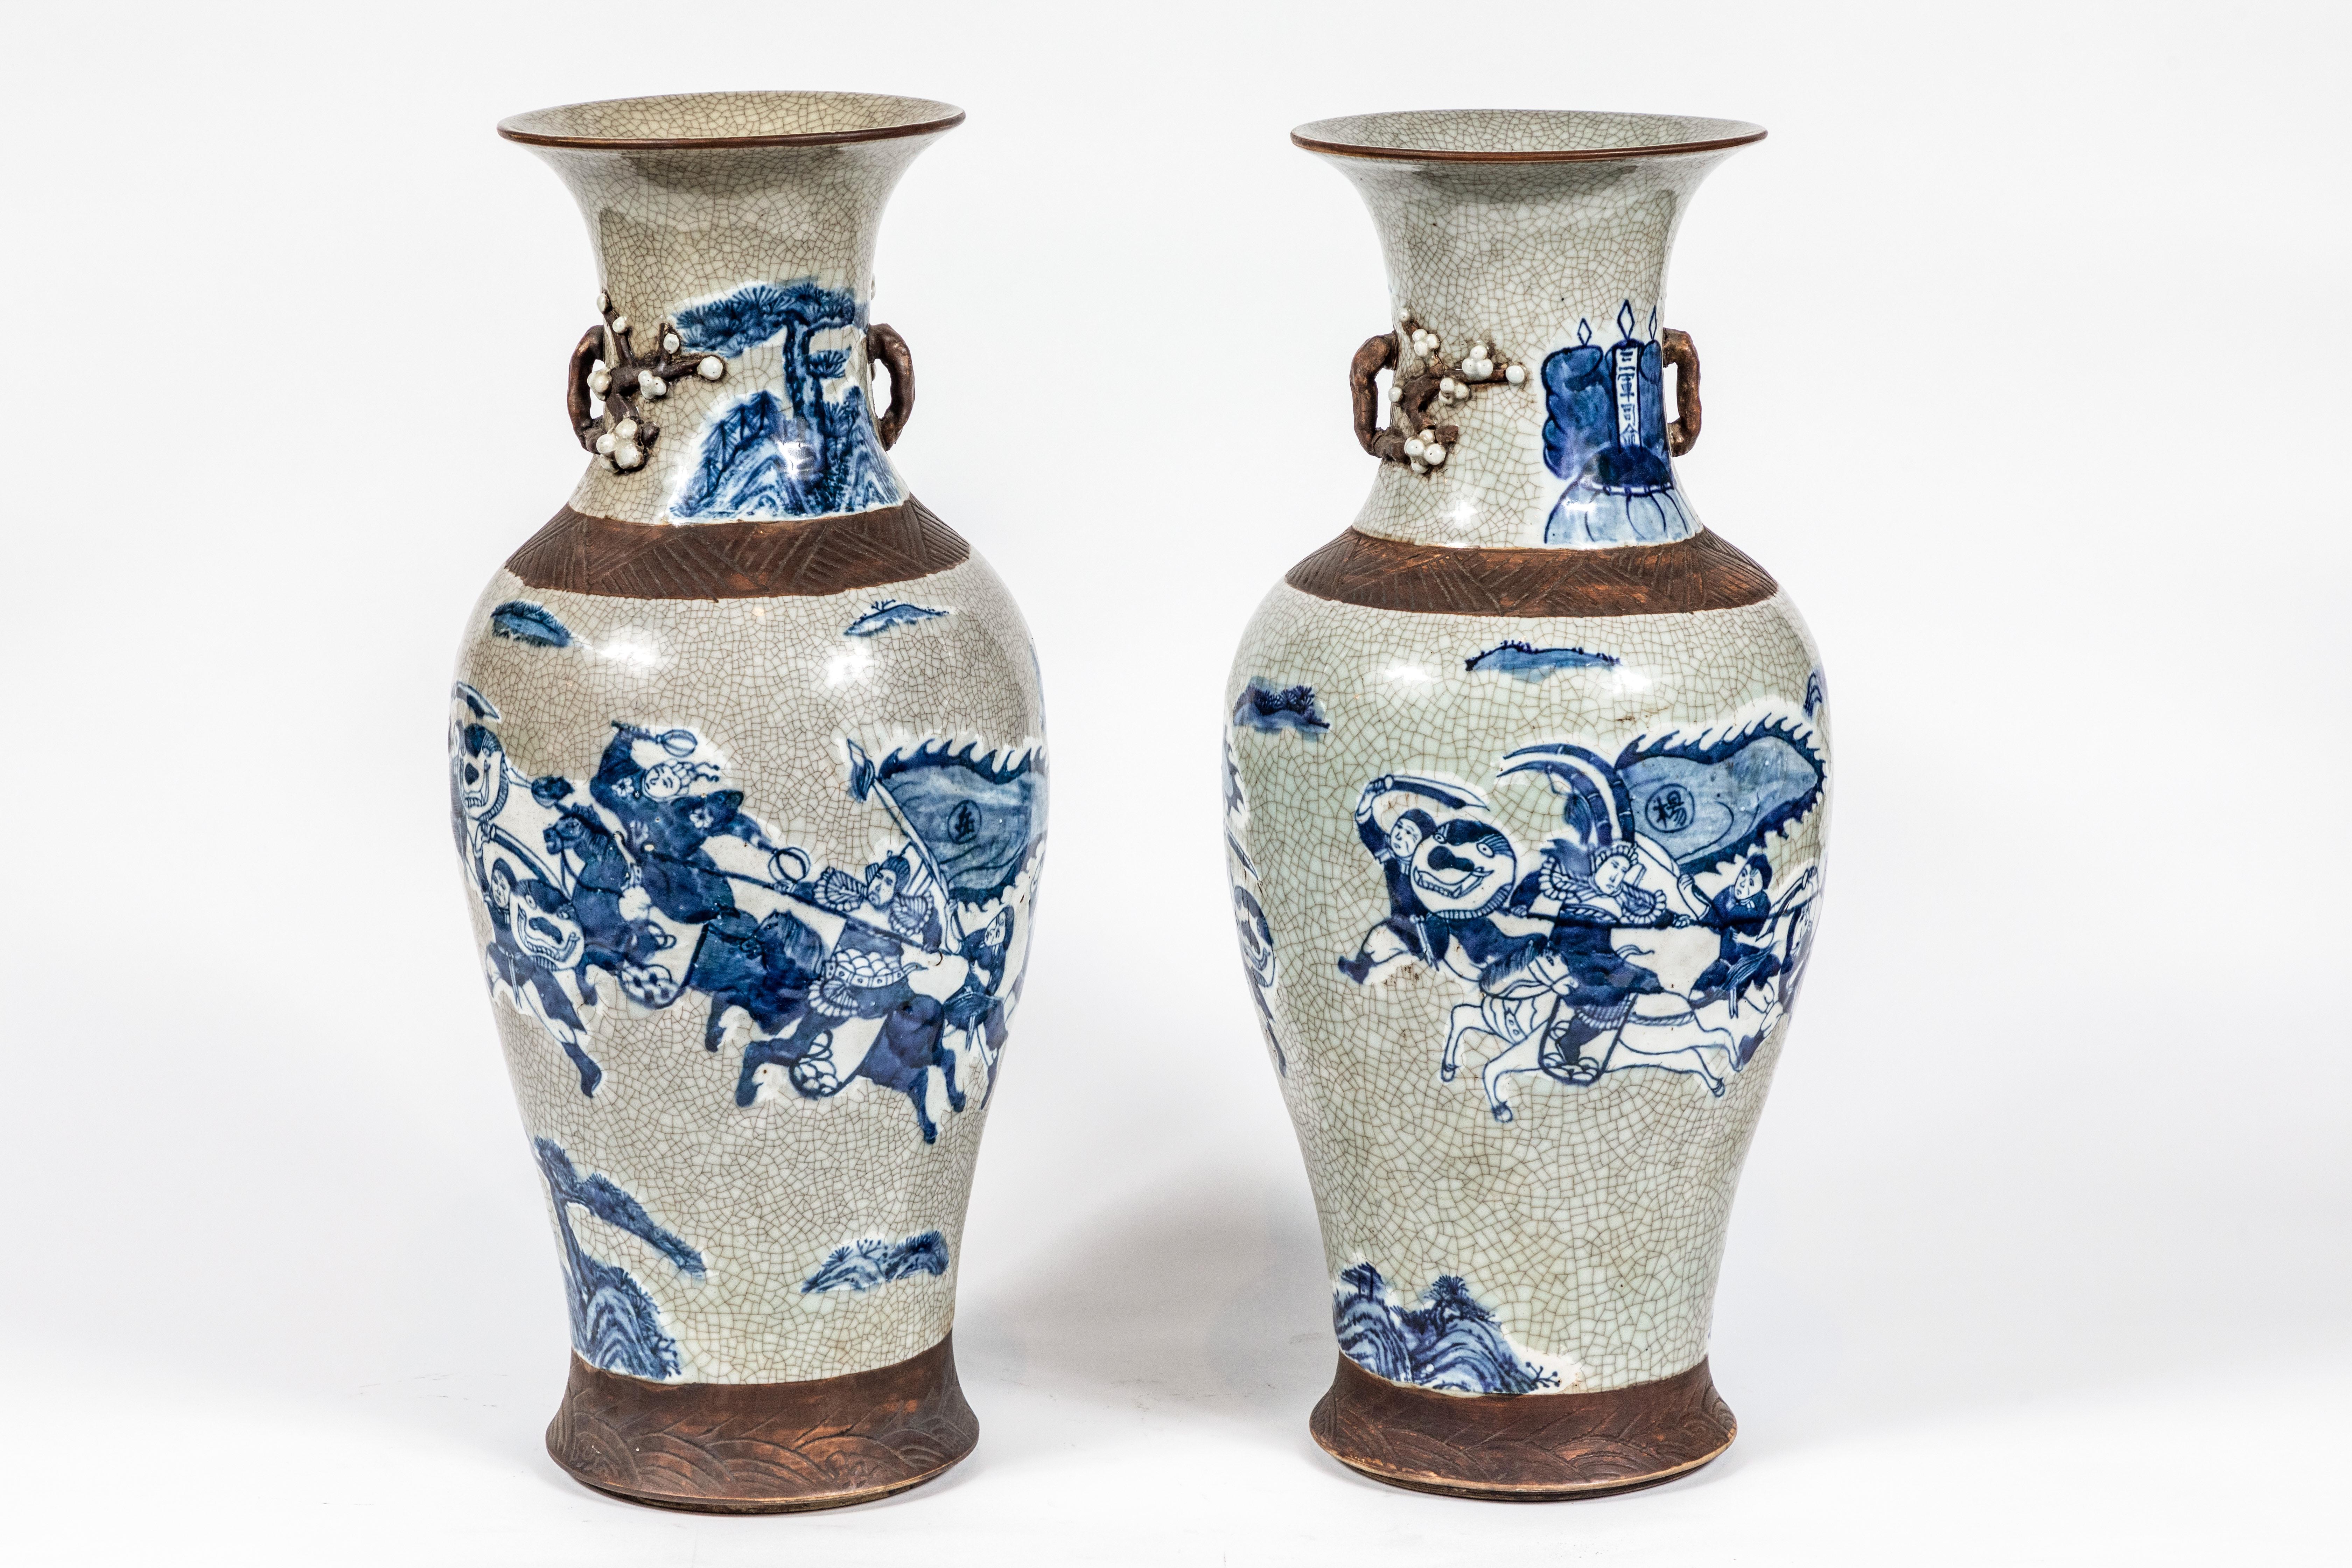 Pair of beautifully made, hand painted, gray-ground, craqueleur-glazed urns featuring incised clay bands and sculpted, willow-branch armatures.